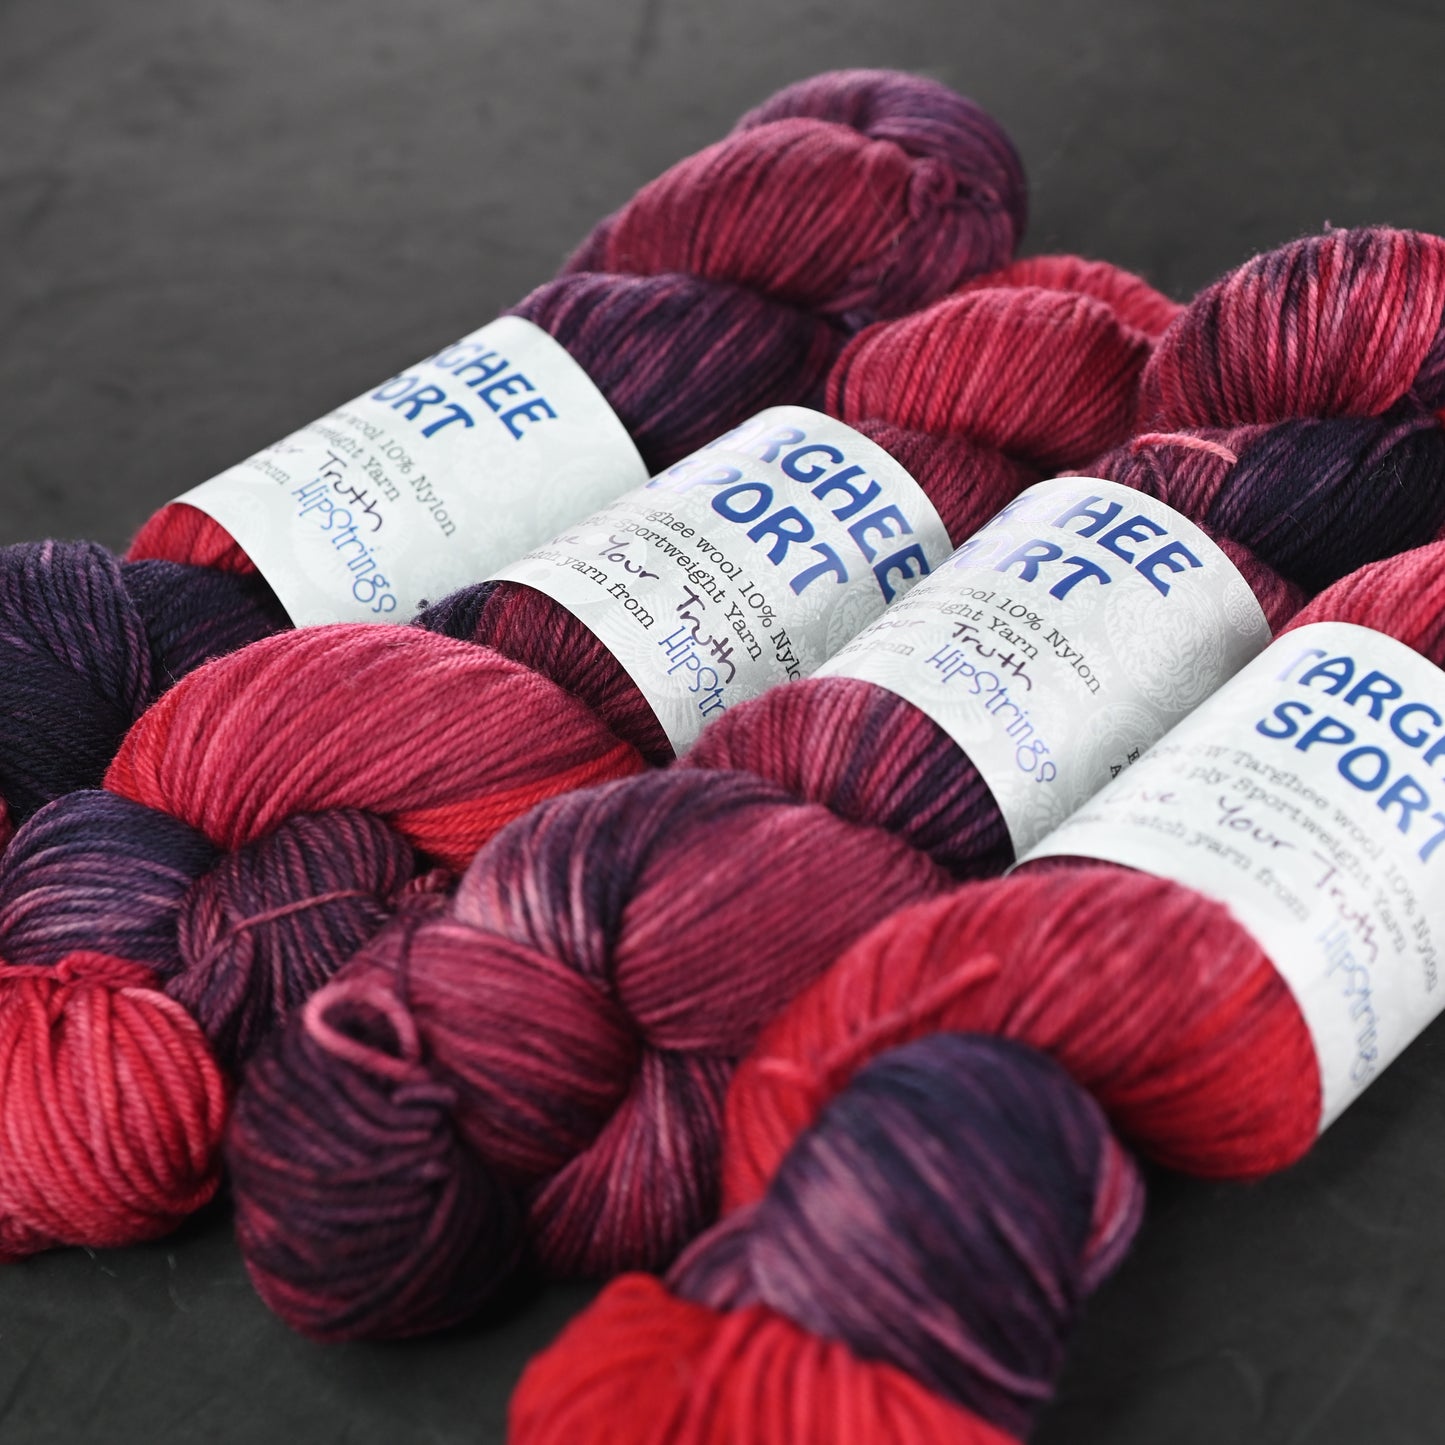 Live your Truth on Hand Dyed Targhee Wool Sport Yarn - 300 yd/100 g